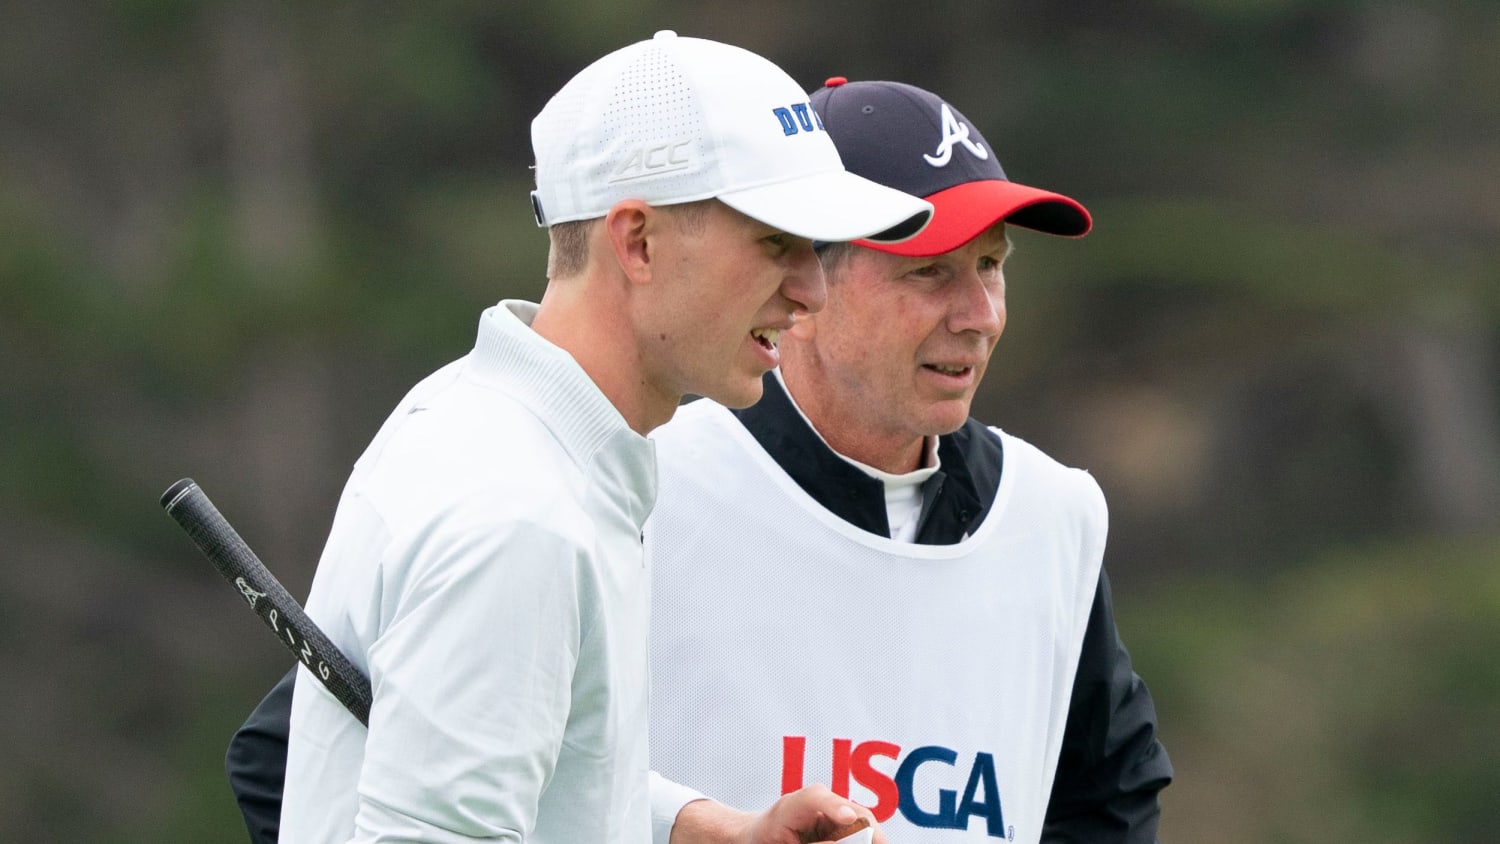 US Open: This dad spends Father's Day as his son's caddie at Pebble Beach